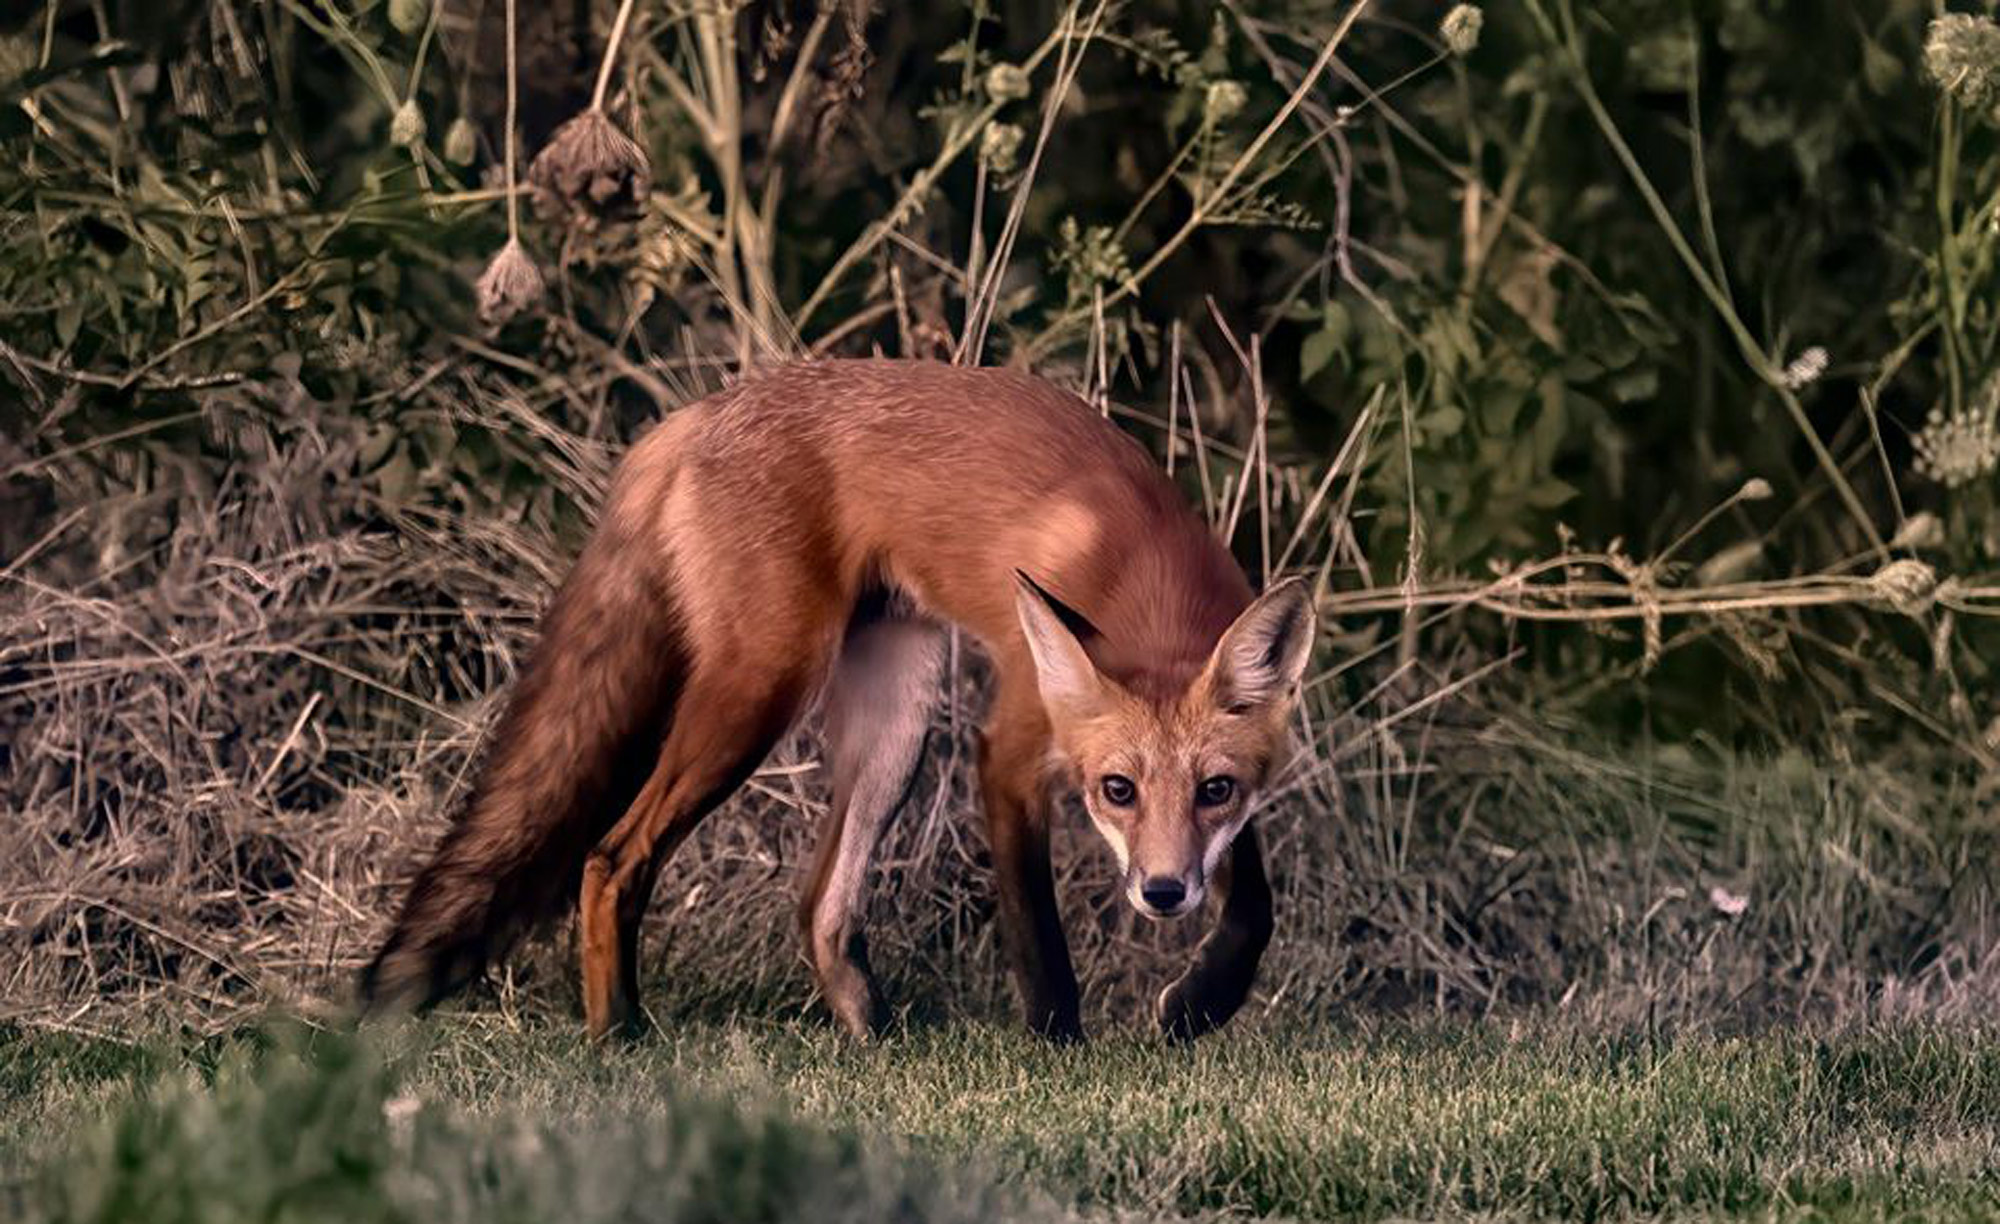 A red fox walking in the grass